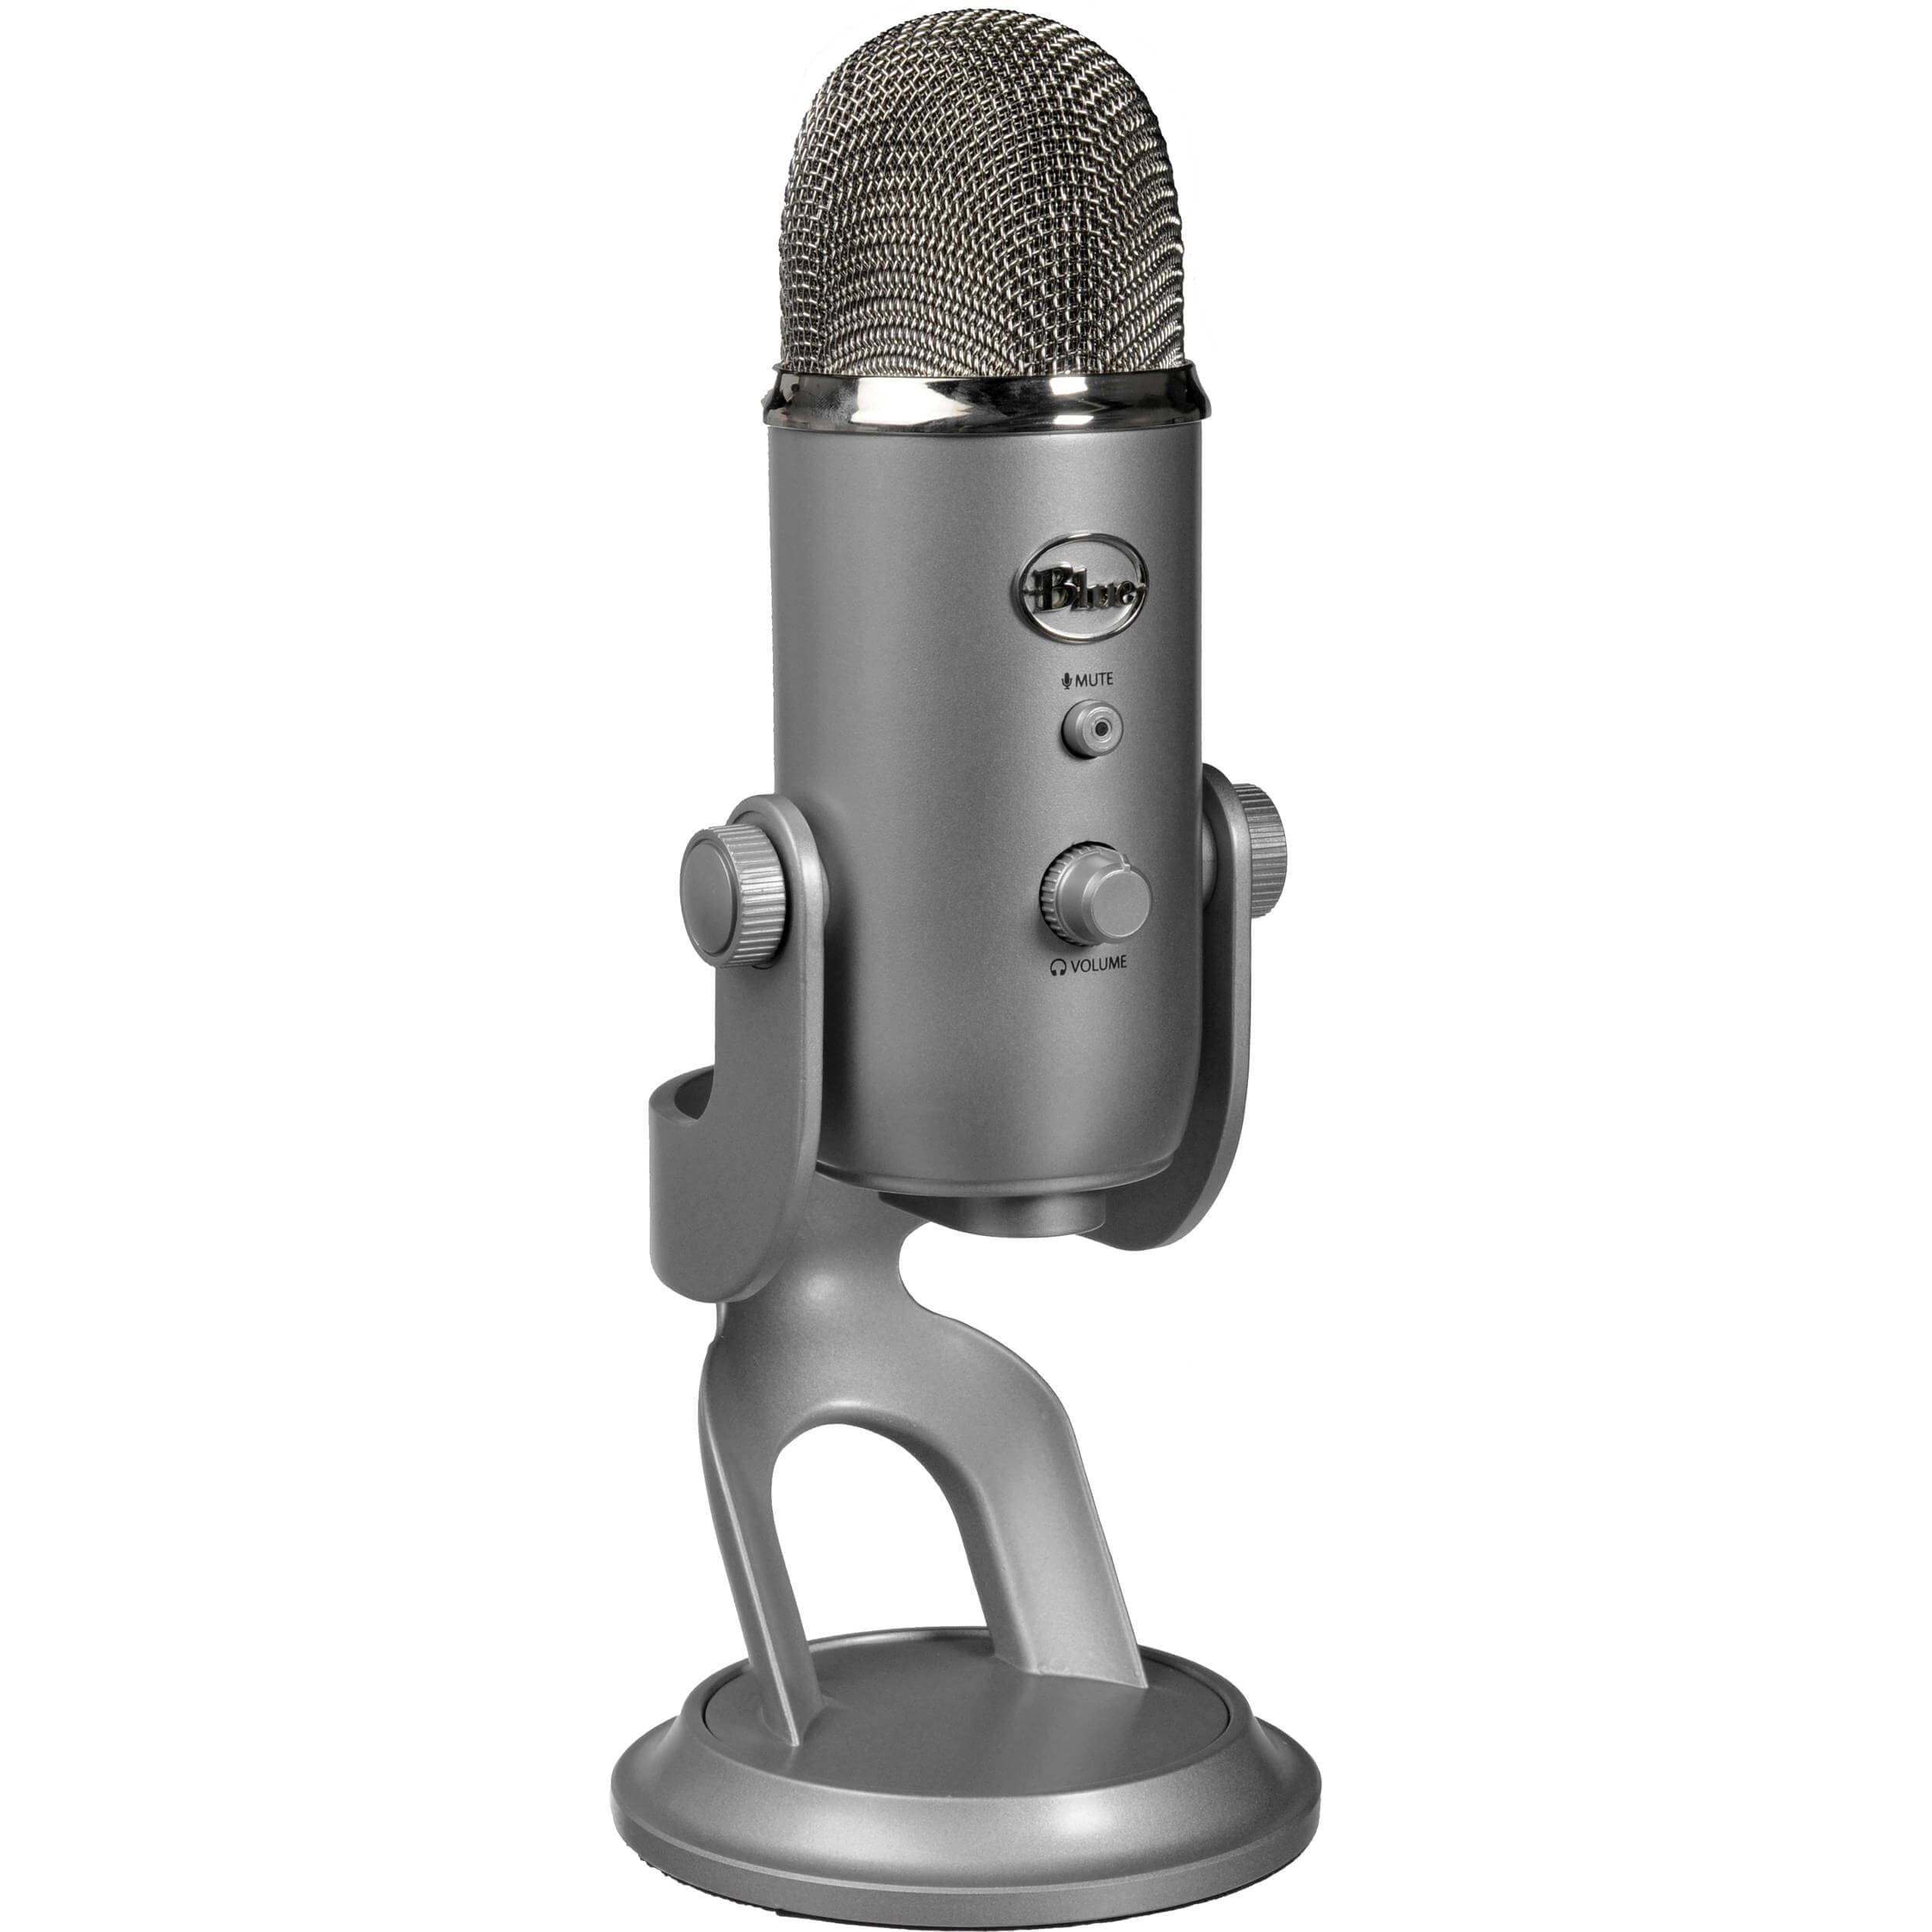  Best Microphone for Live Streamers and Gamers: Blue Yeti USB 